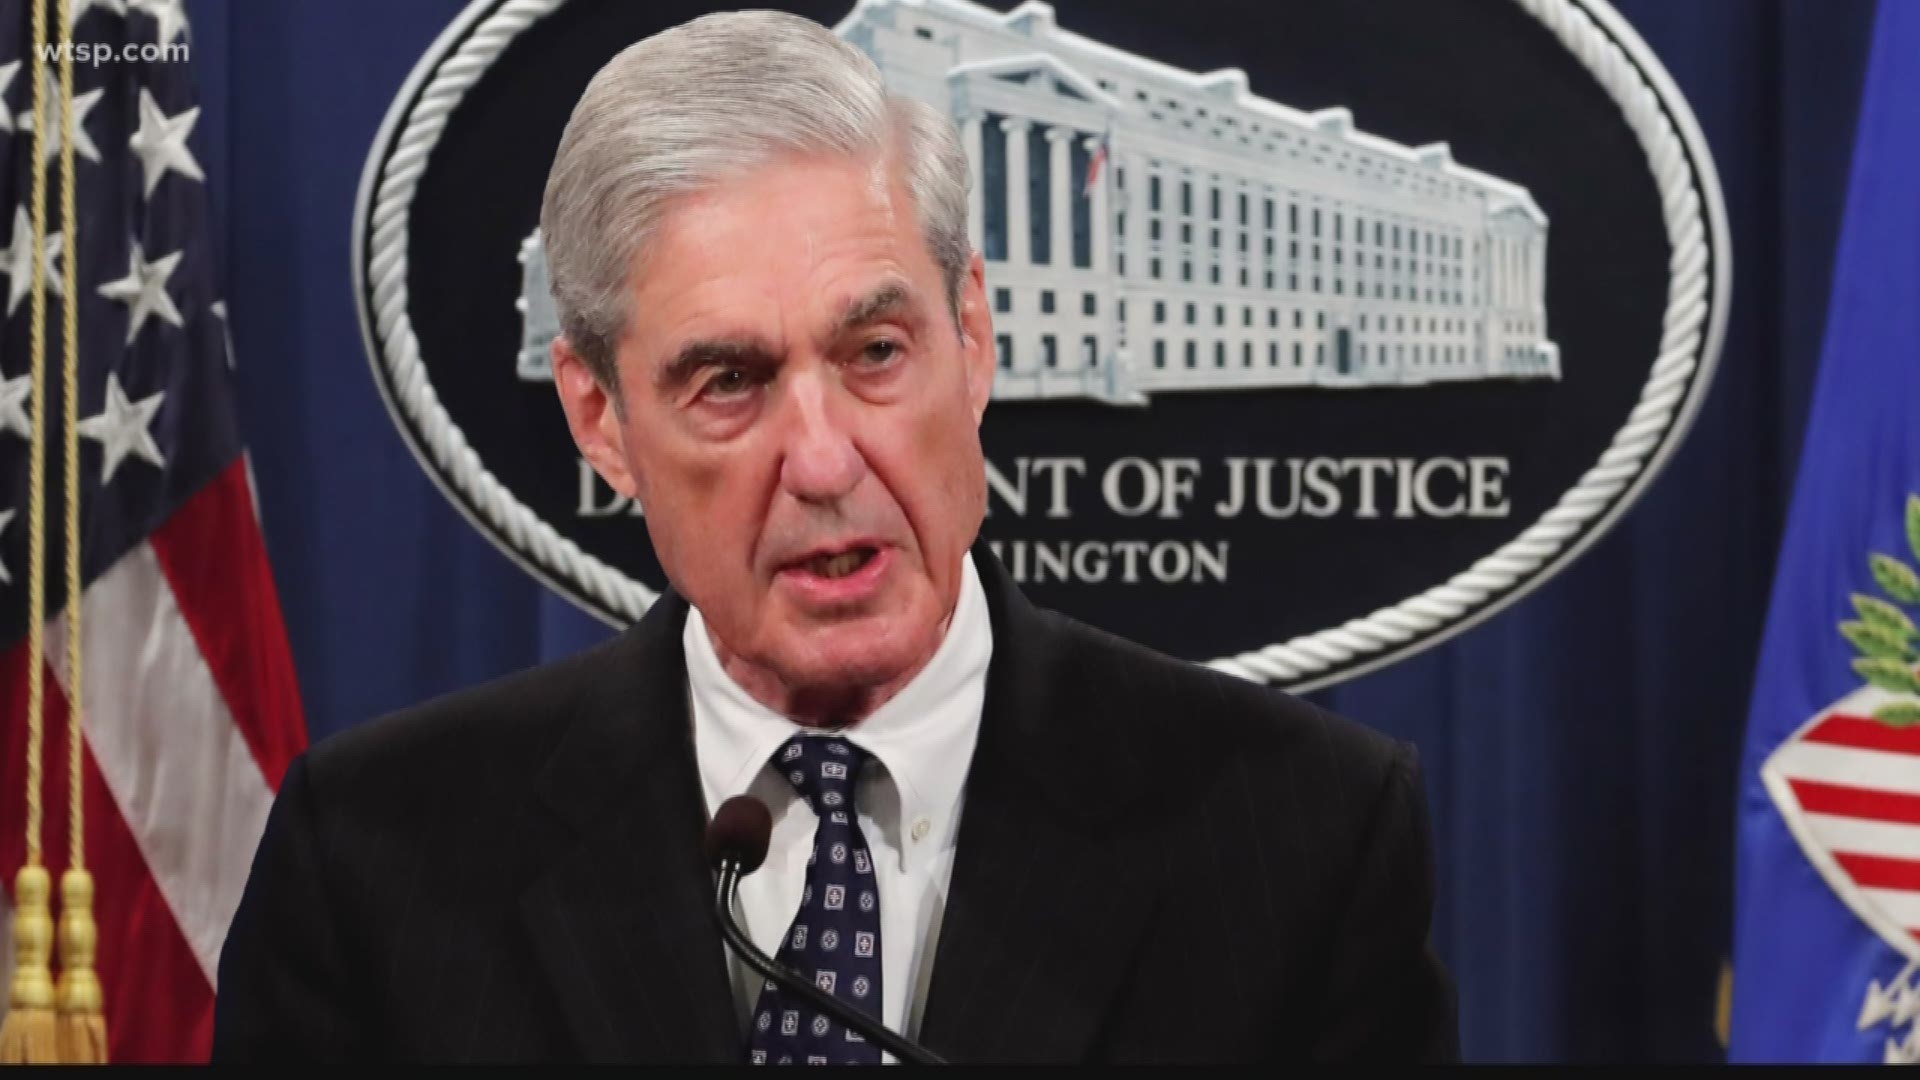 Former Trump-Russia special counsel Robert Mueller finally faces congressional interrogators Wednesday. Mueller is set to testify in televised hearings that Democrats hope will weaken President Donald Trump's reelection prospects. Republicans are ready to defend Trump, and turn their fire on Mueller and his team instead. https://on.wtsp.com/2GrqCWO